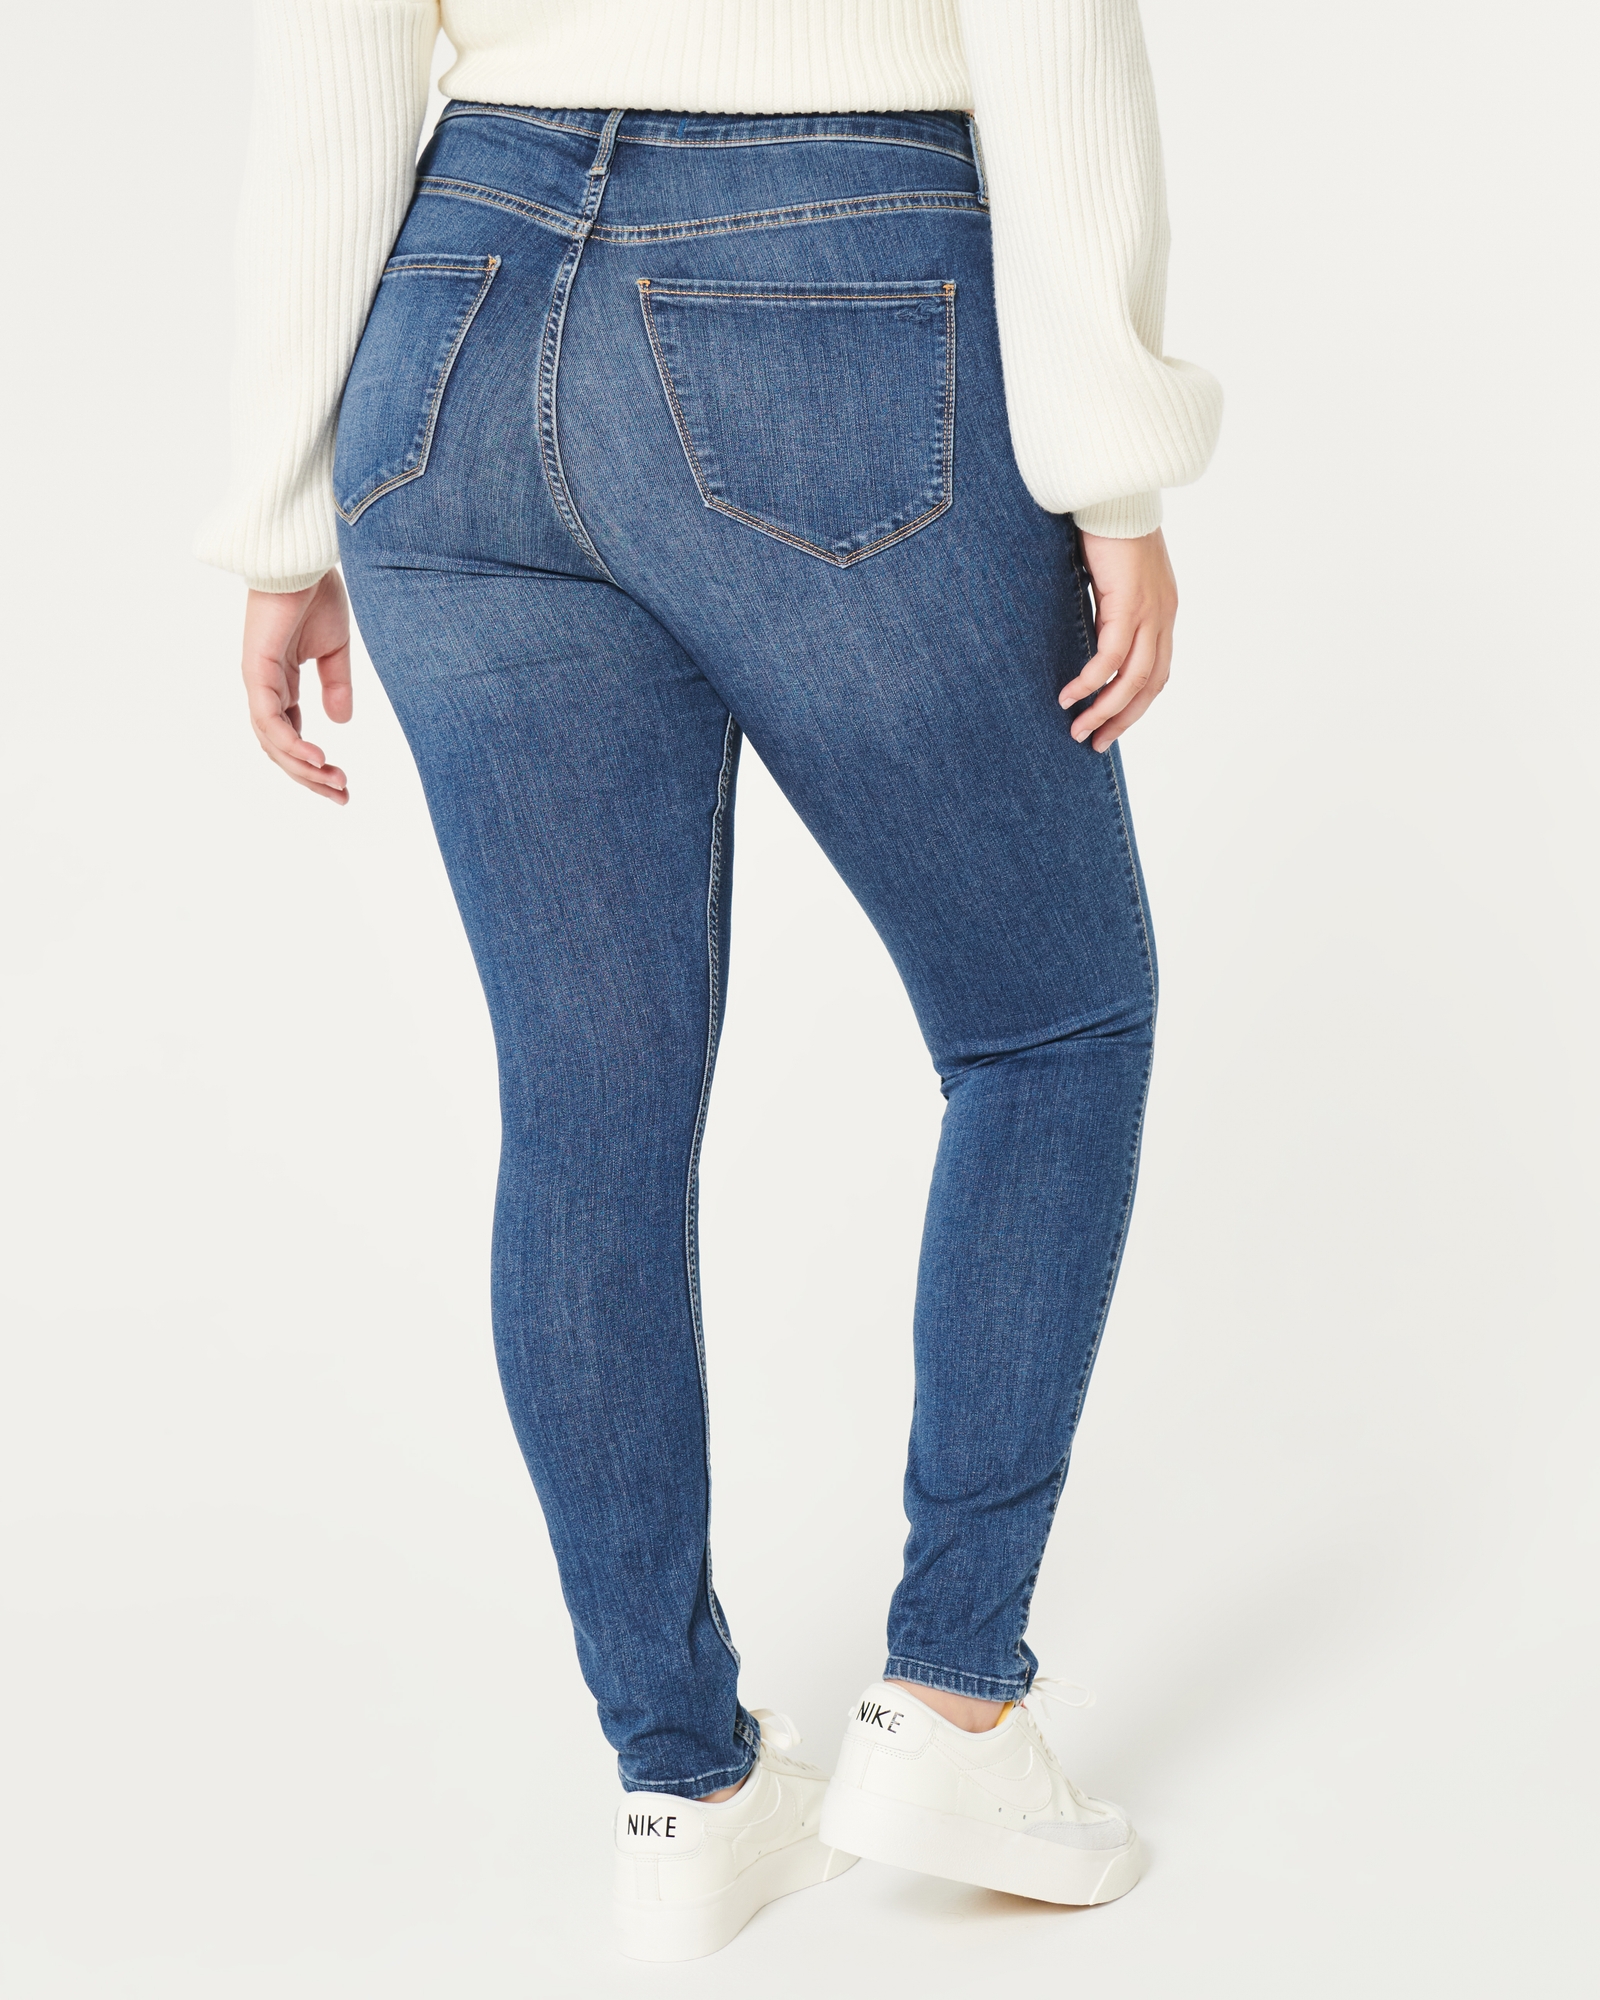 Hollister Jeggings High Rise Blue Size 24 - $7 (85% Off Retail